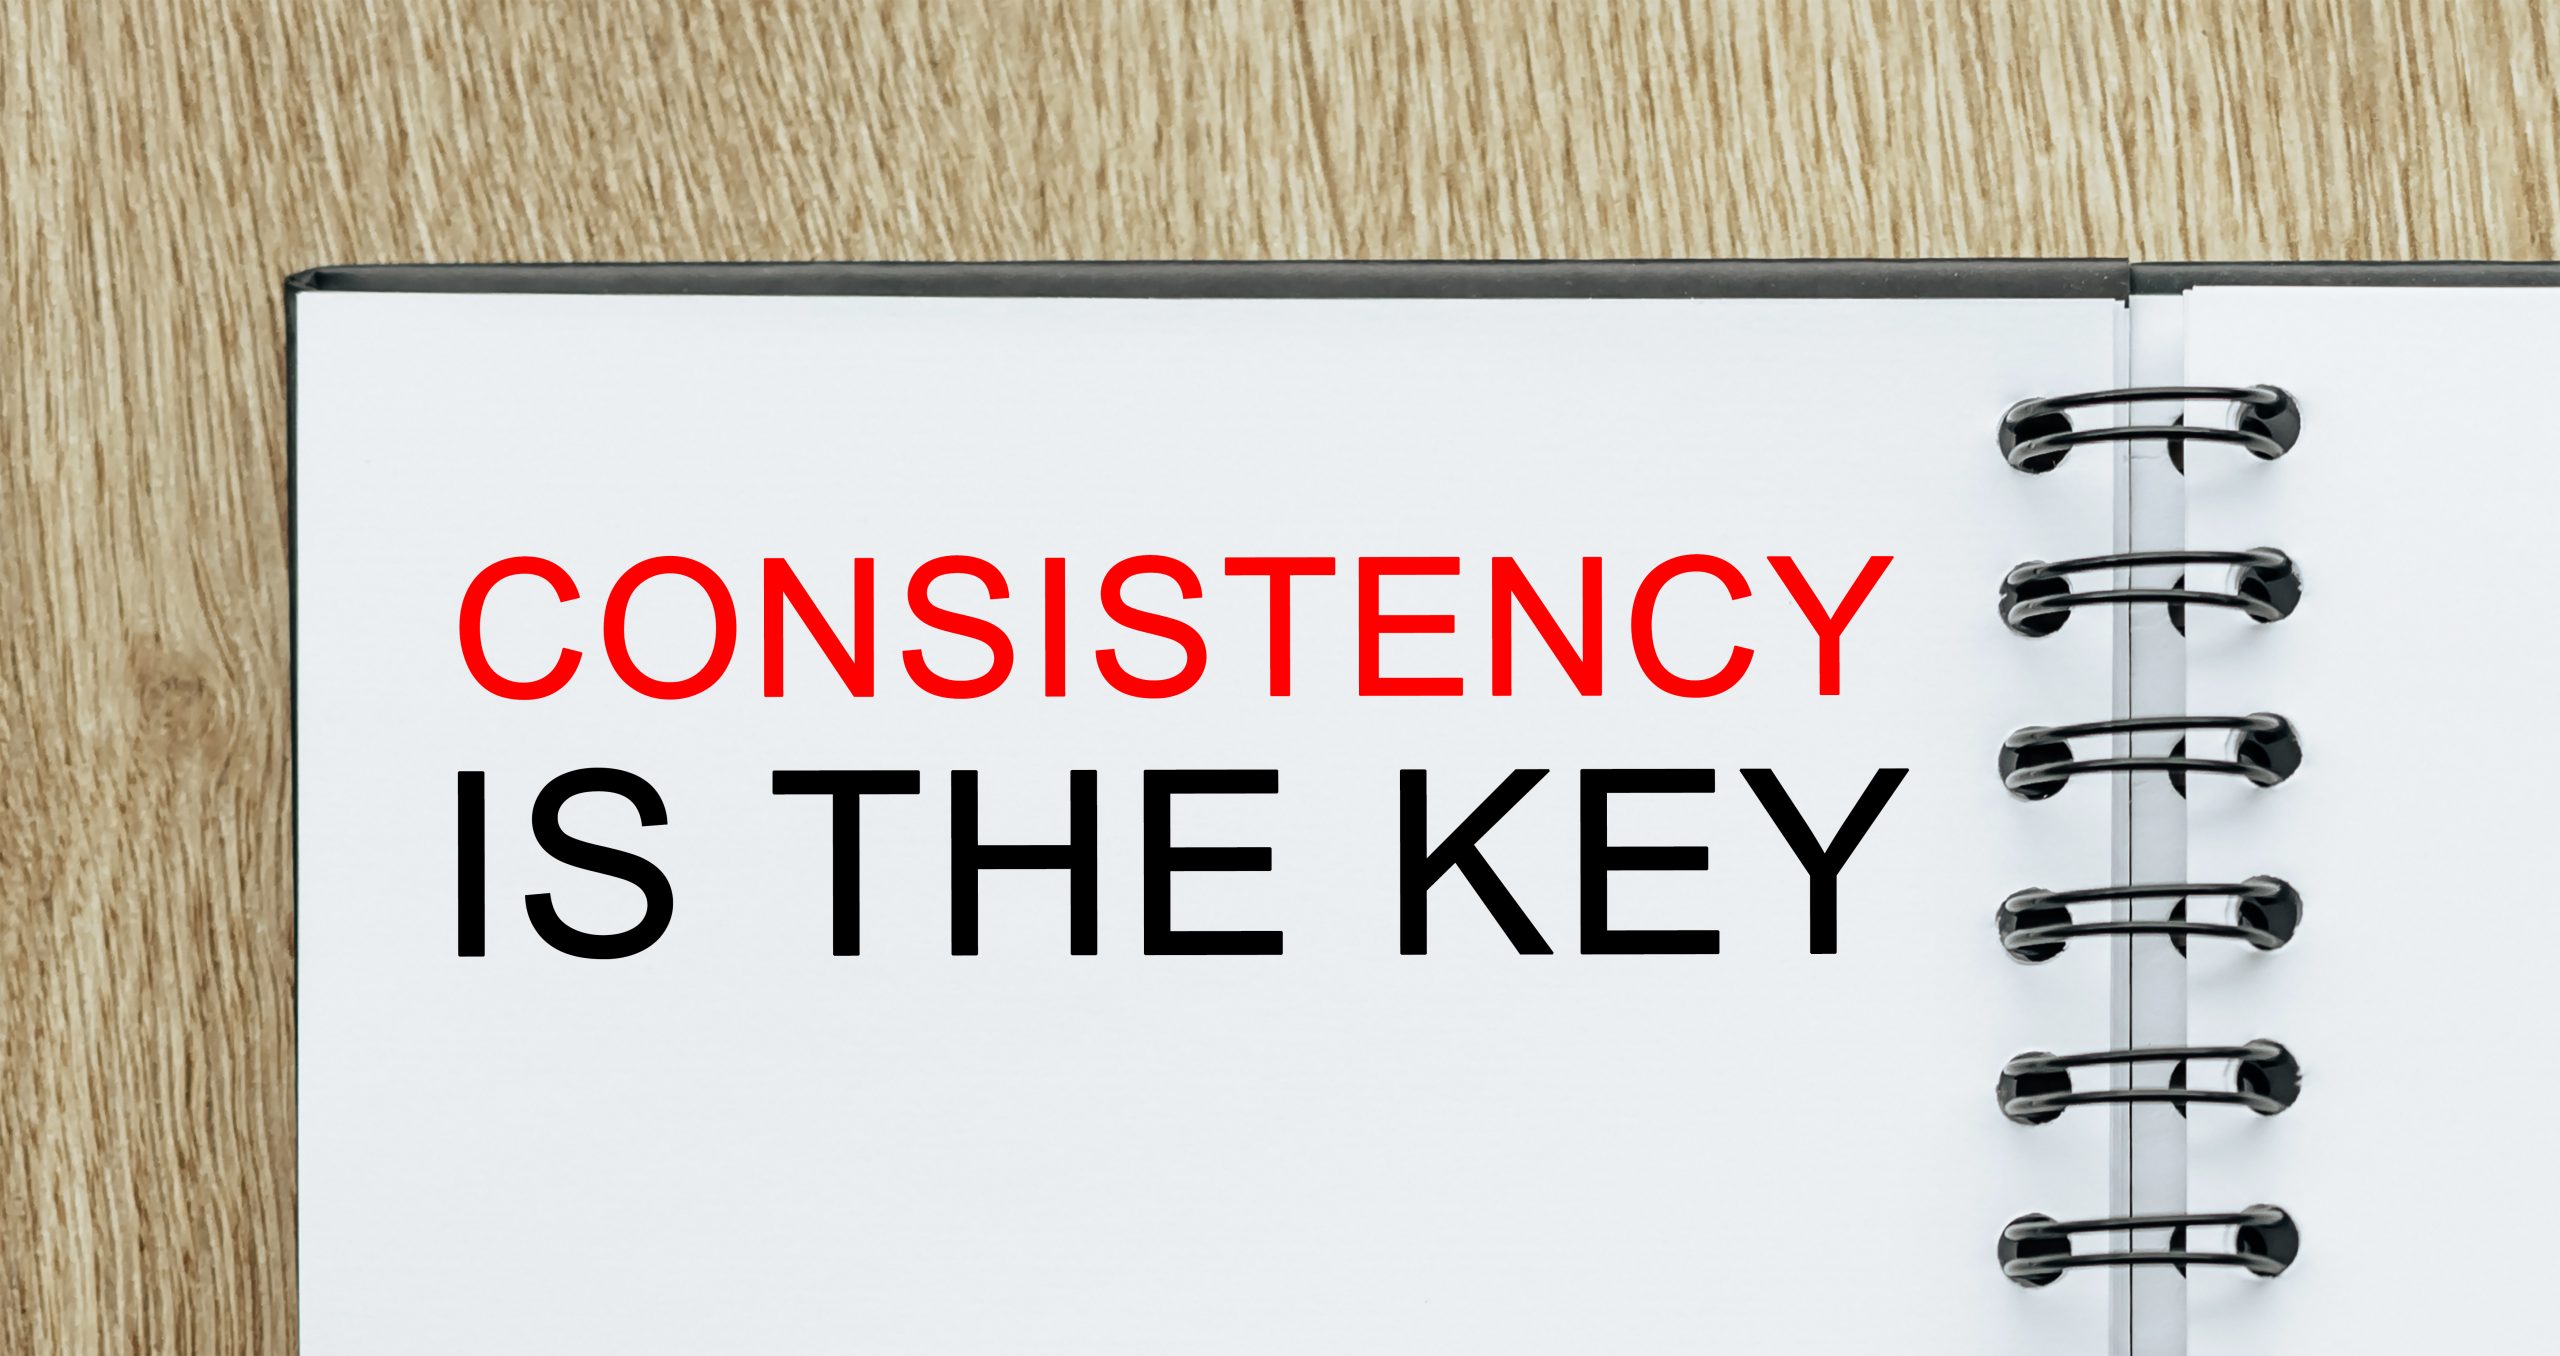 'Consistency is the key' in a notebook on a wooden desk